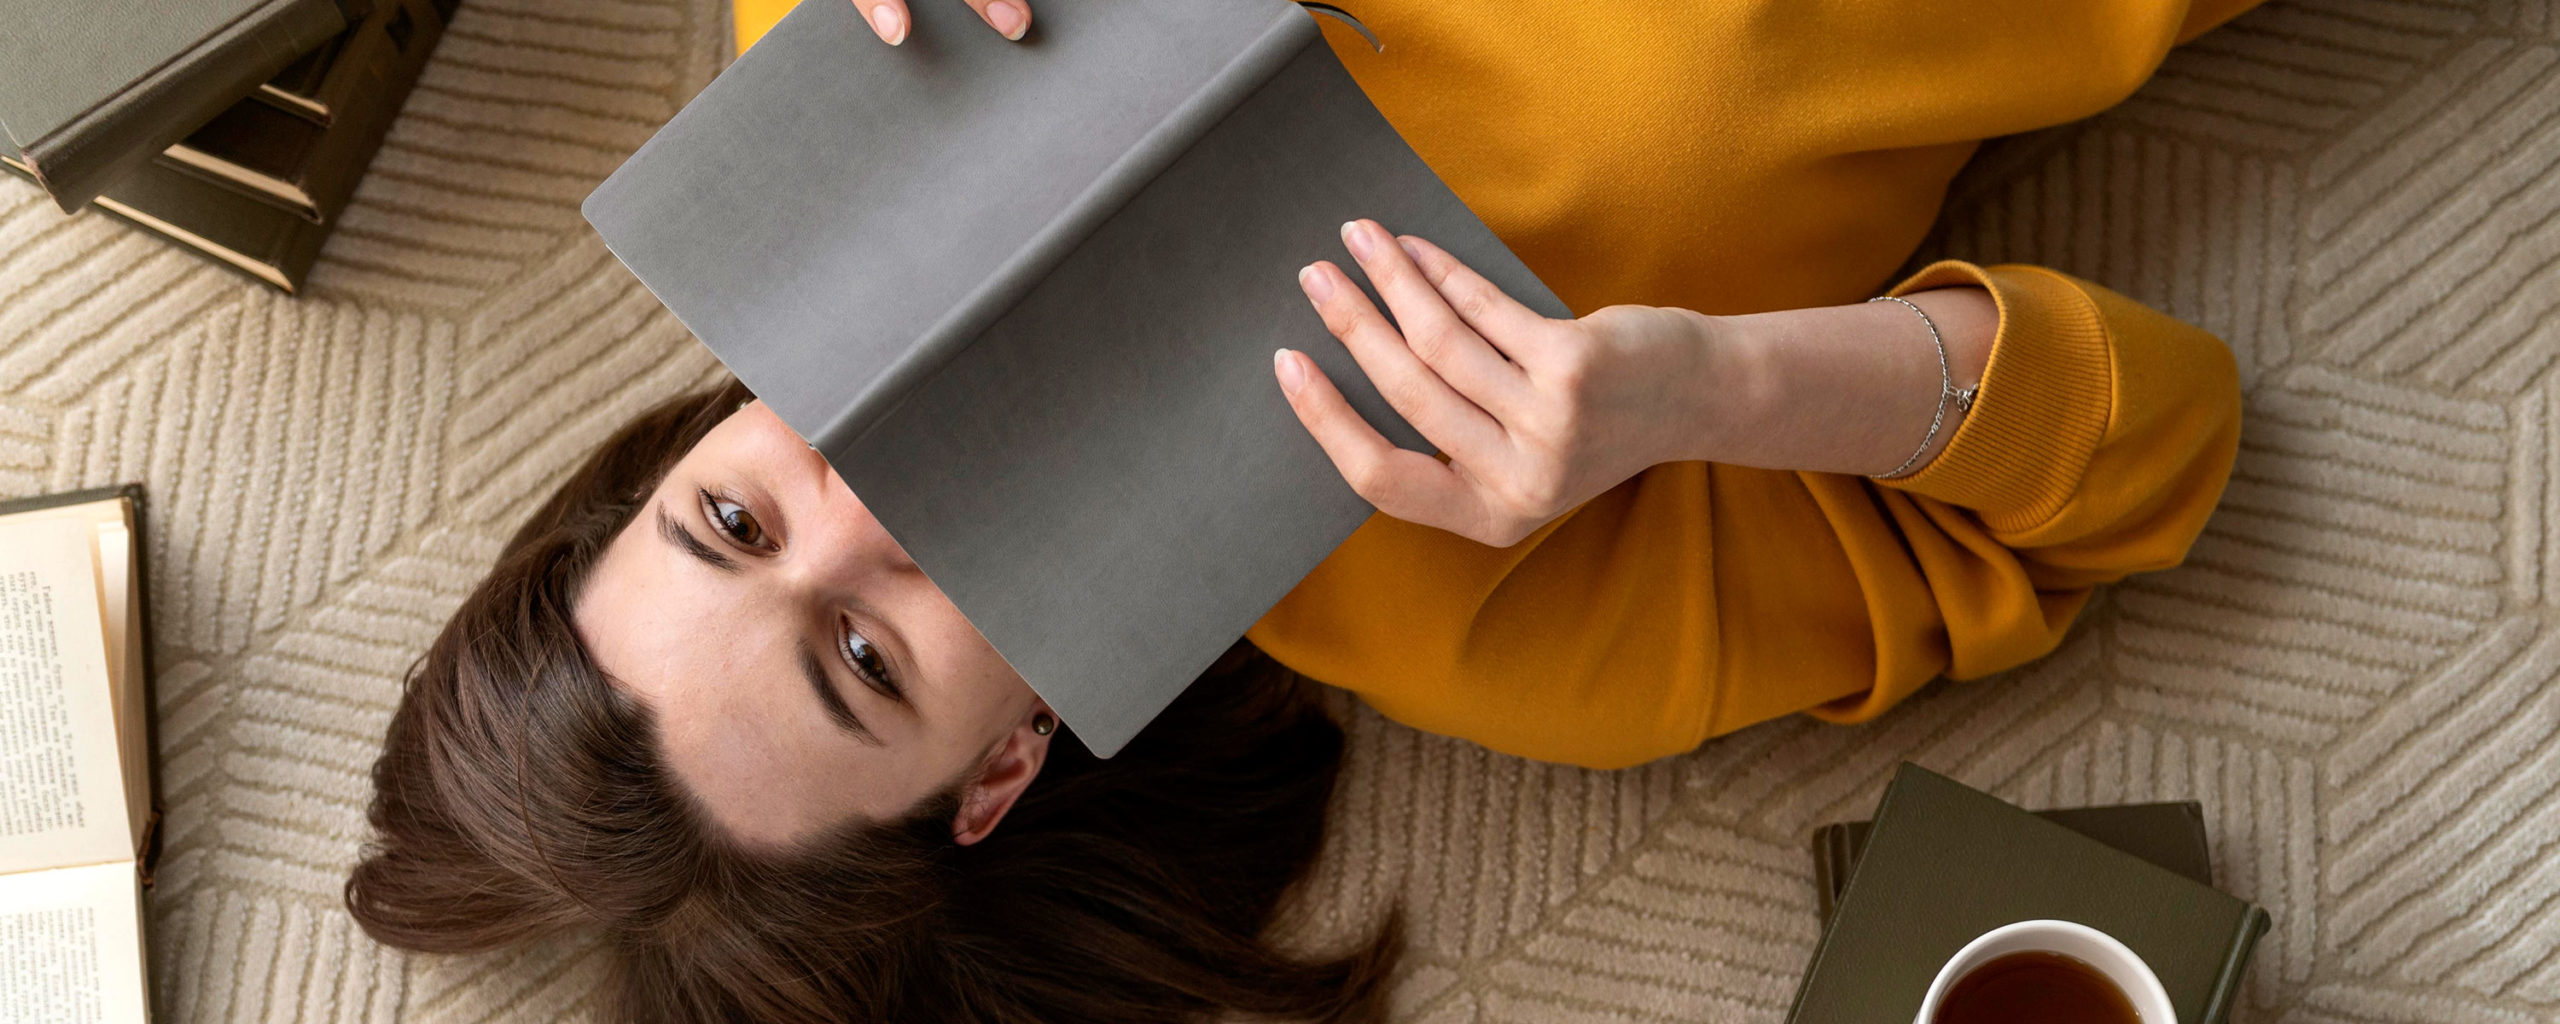 top view of woman reading book